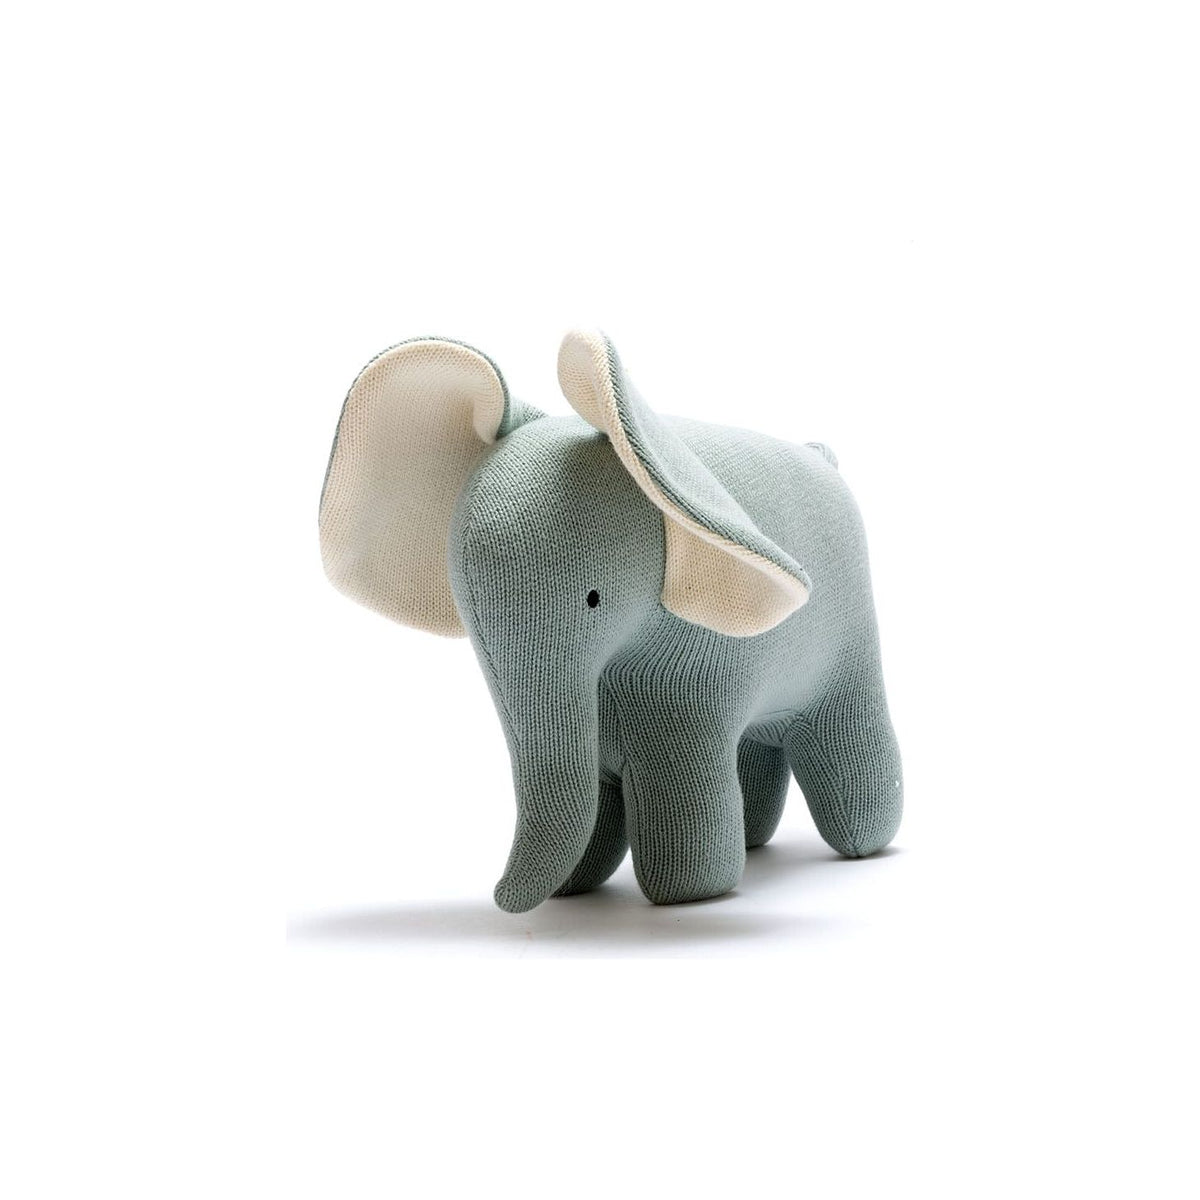 Best Years Ltd Organic cotton knitted large elephant toy in teal